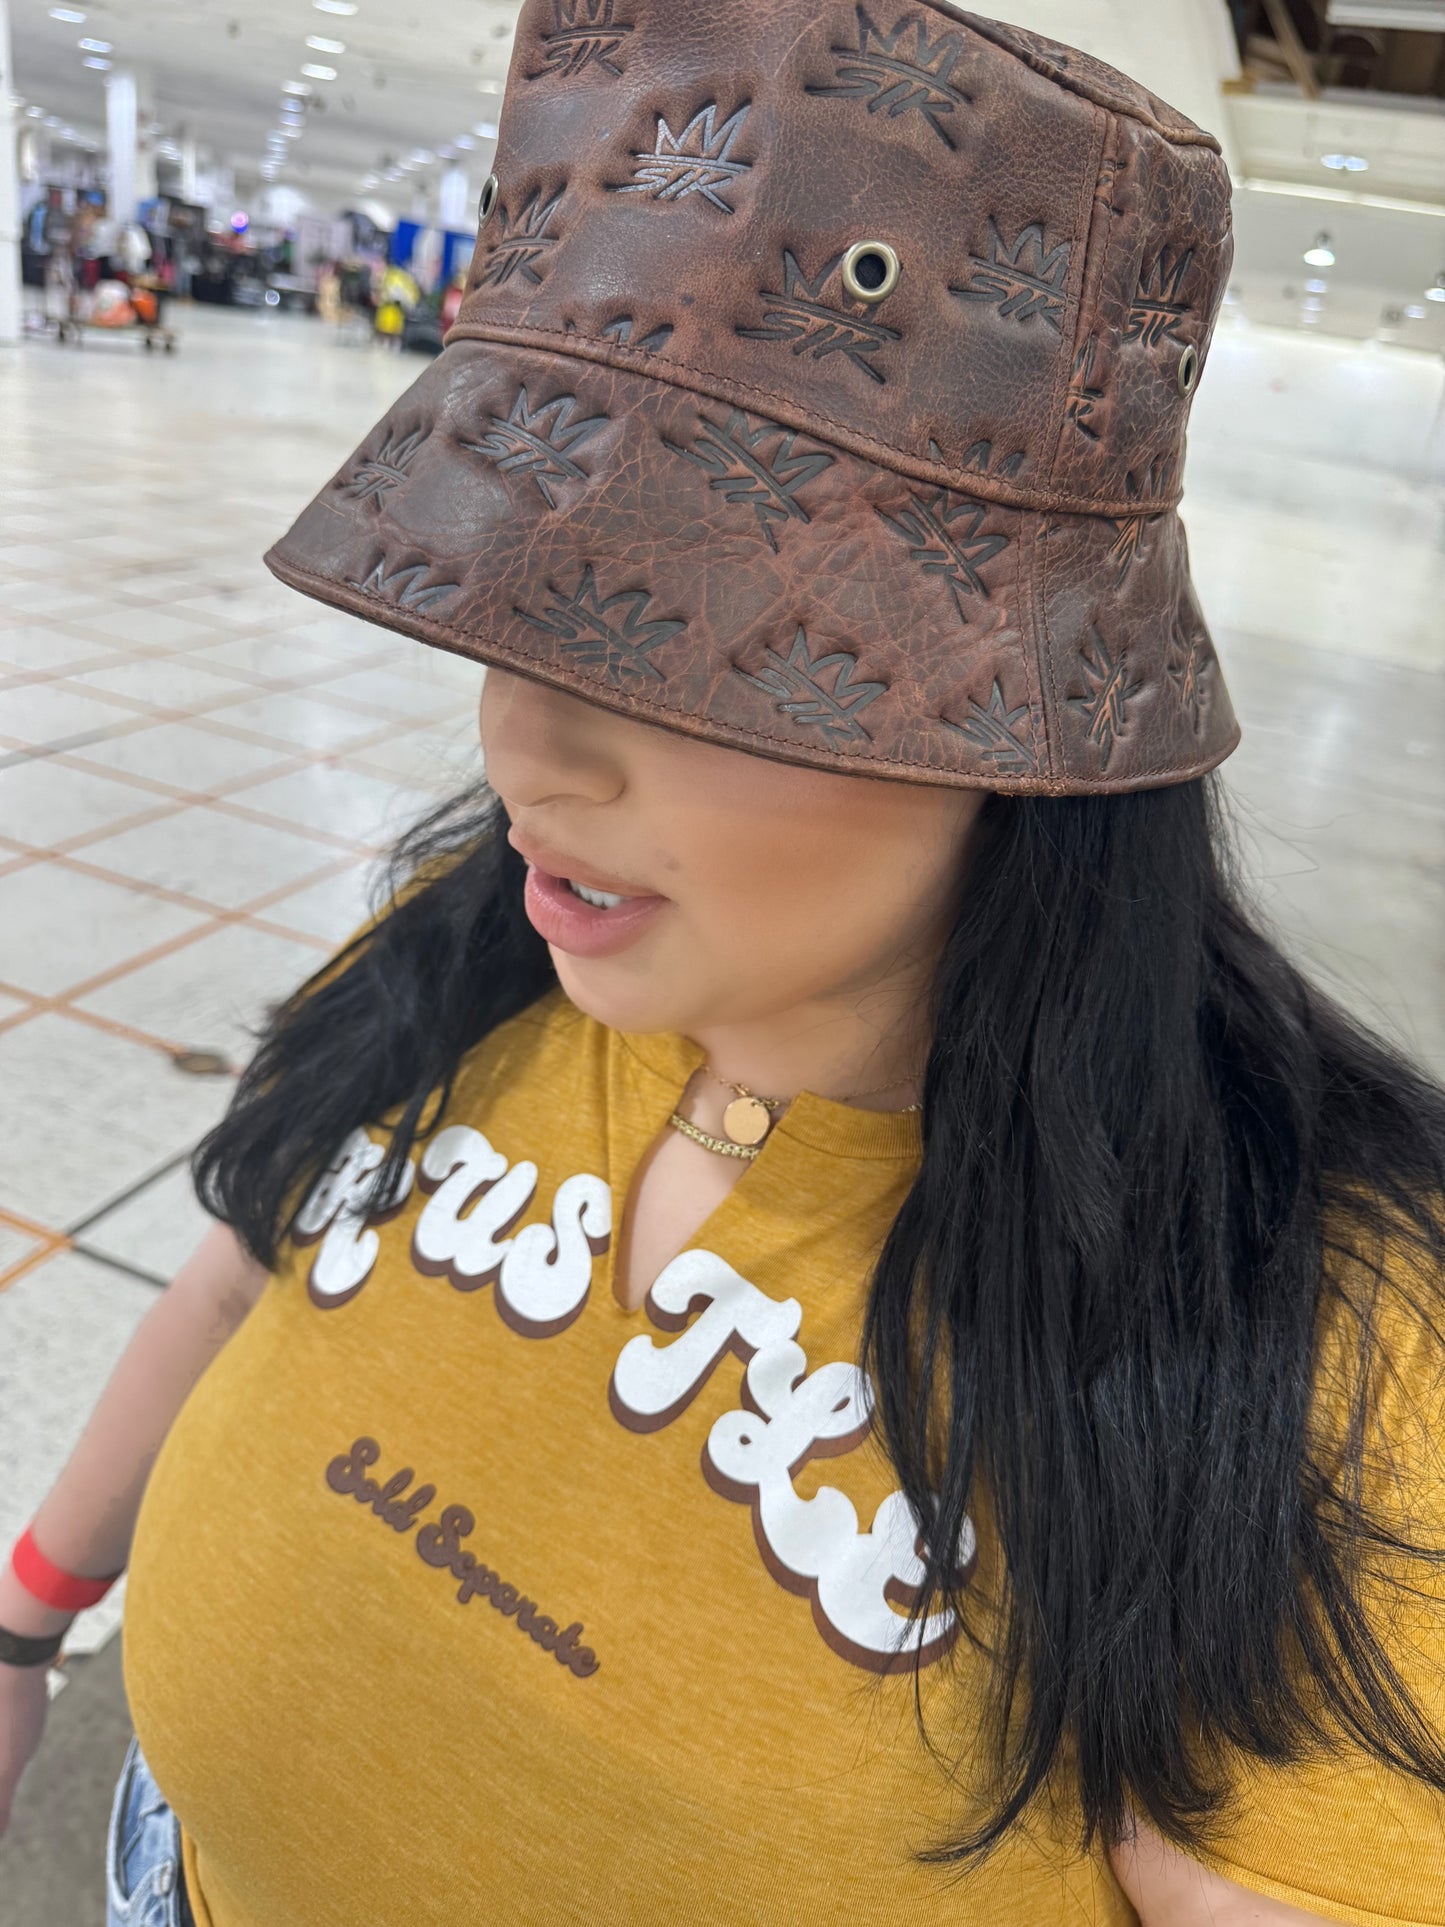 Brown Leather Bucket Hat